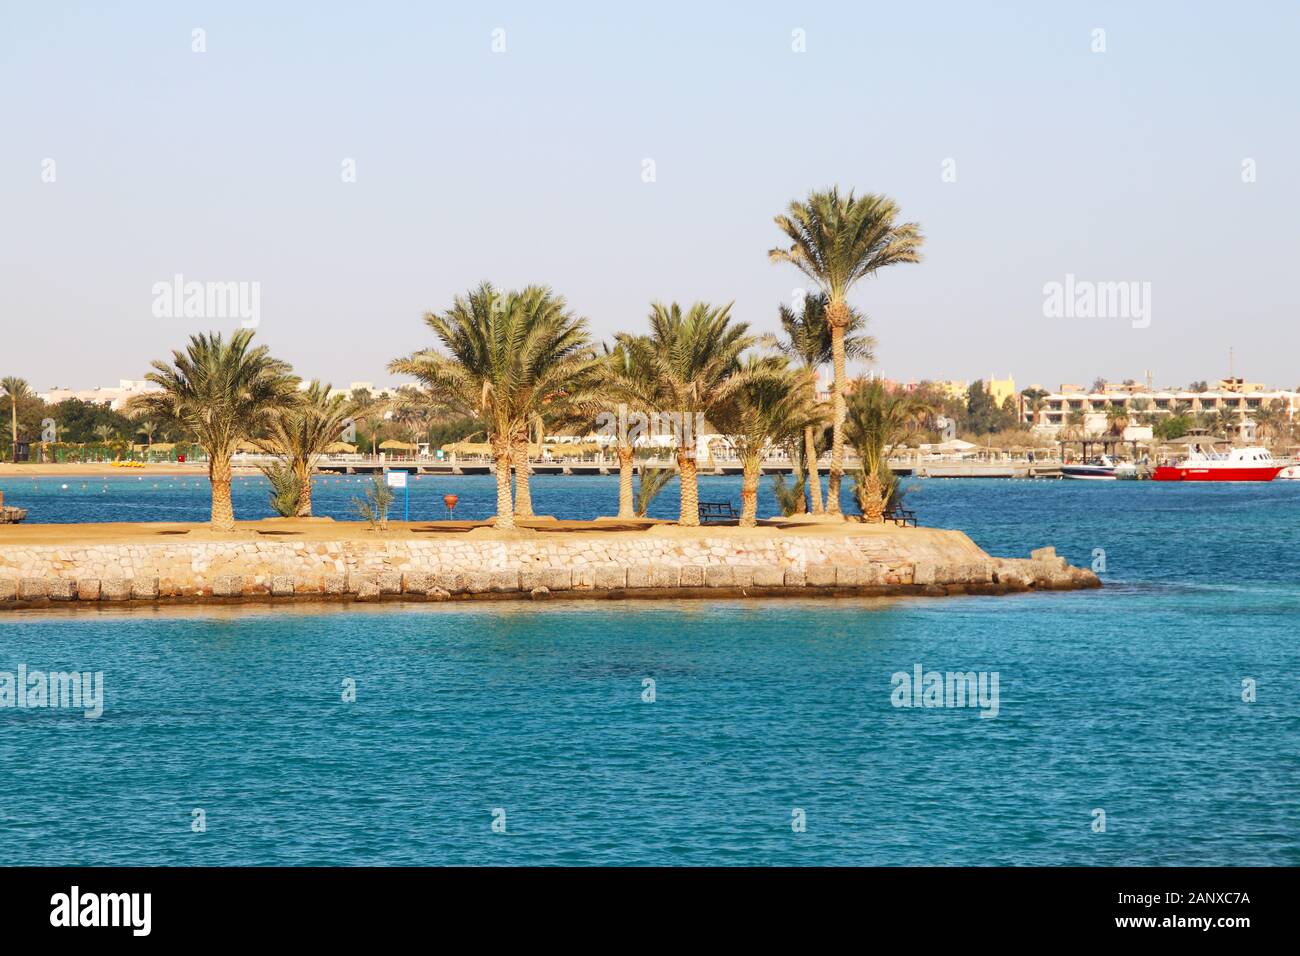 Small island with palm trees Stock Photo